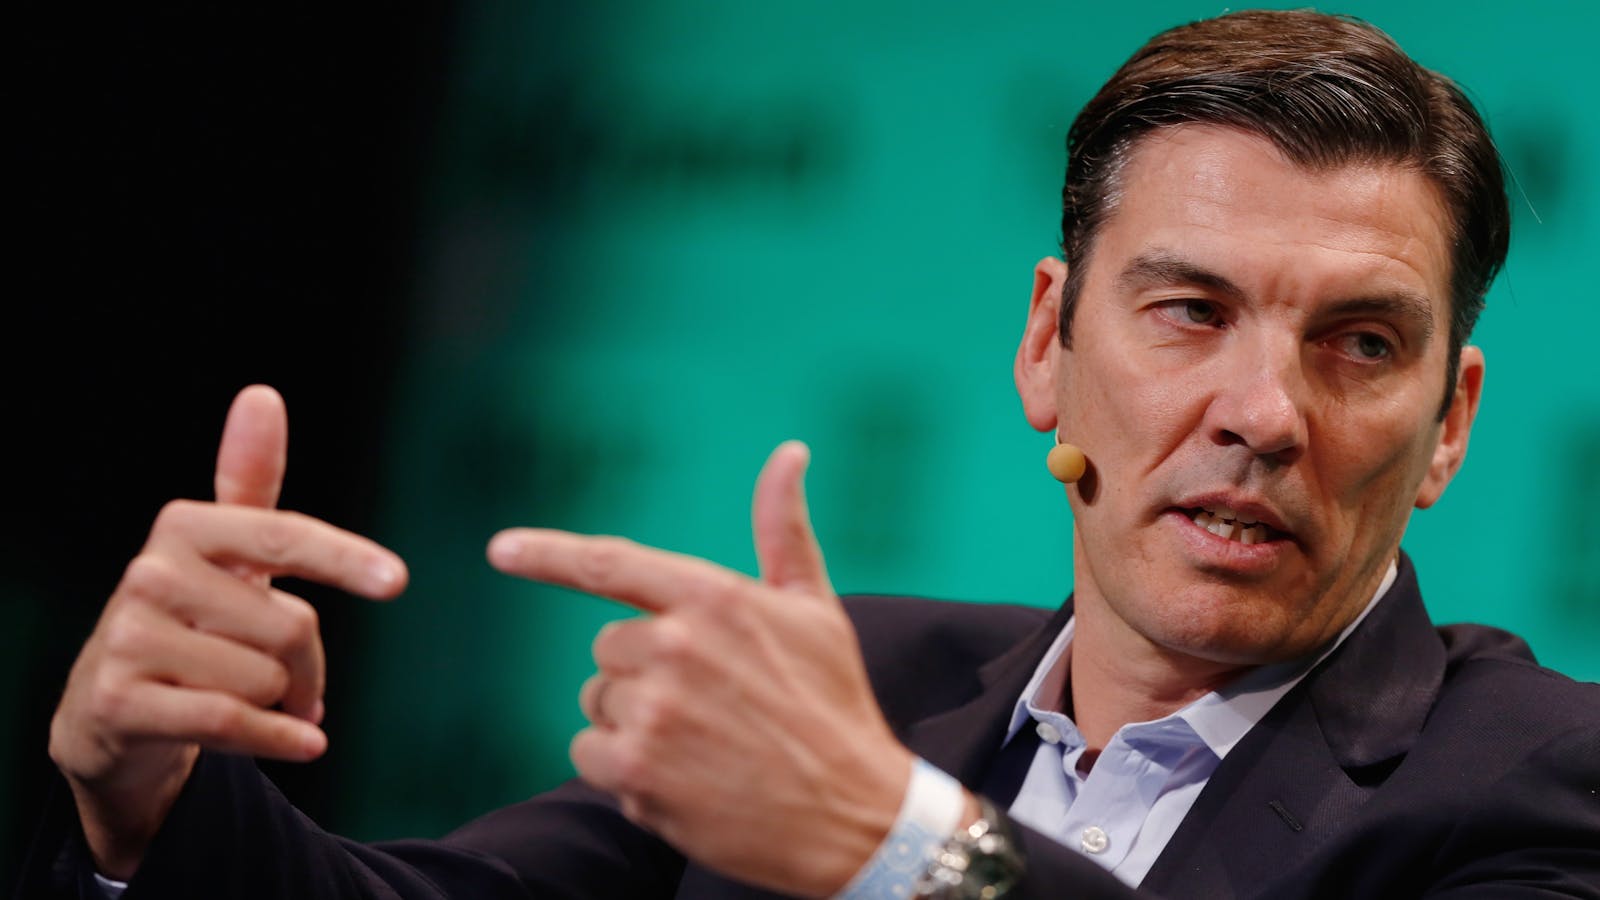 AOL CEO Tim Armstrong. Photo by Bloomberg.